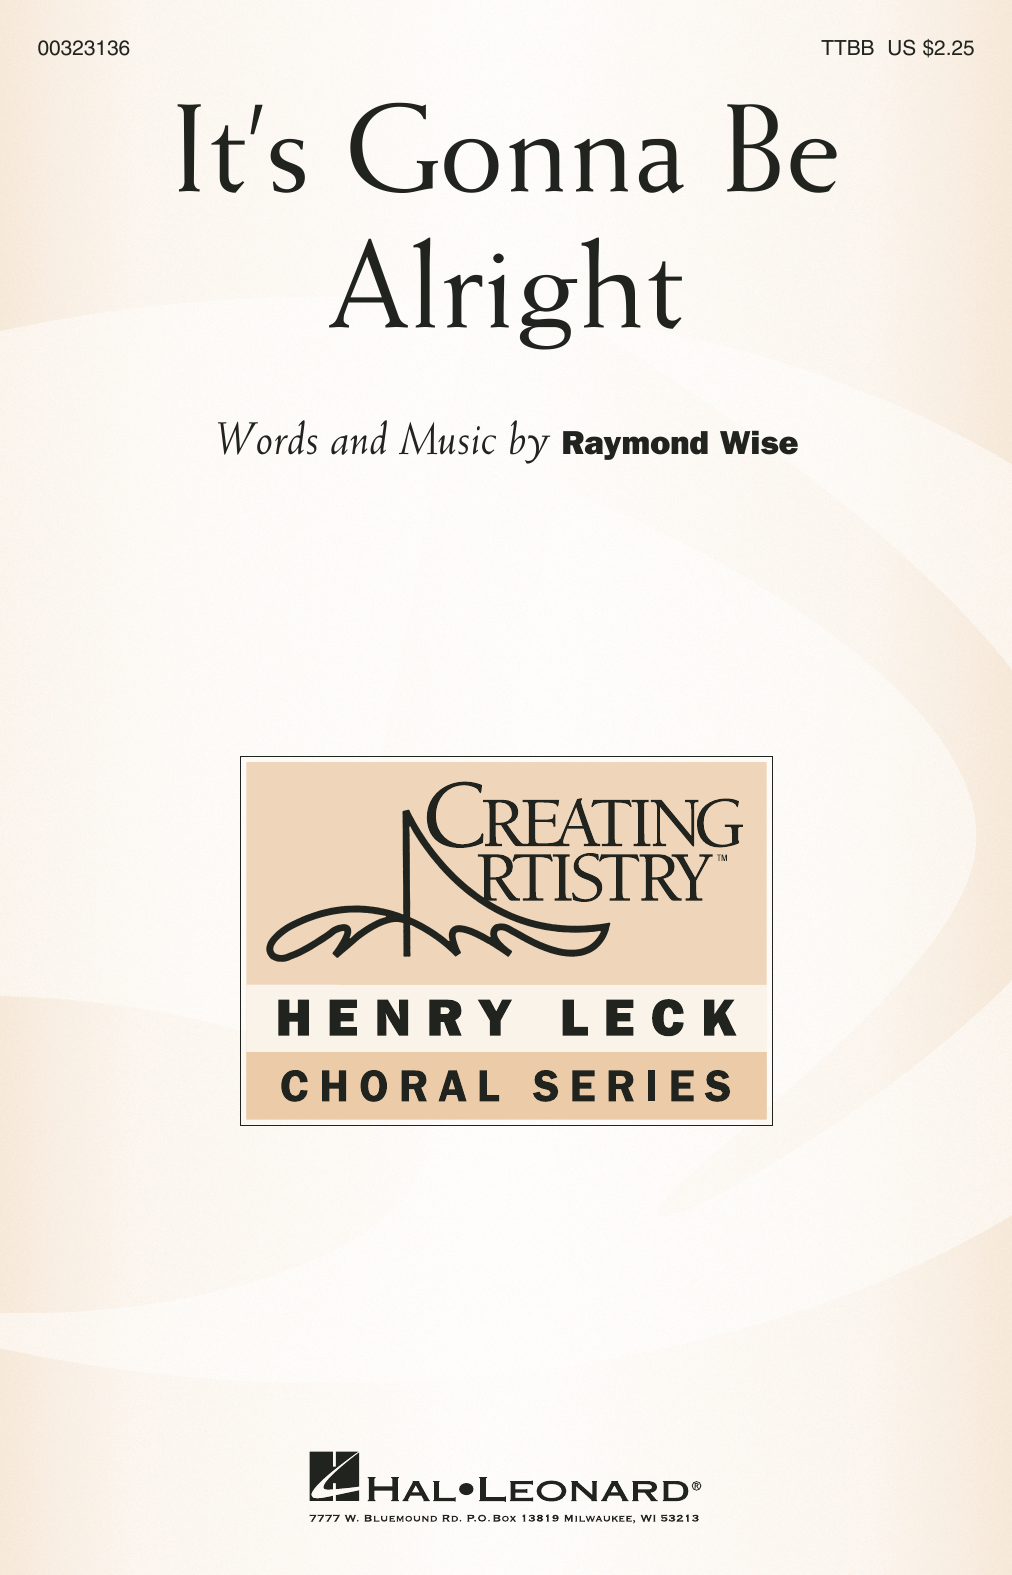 Download Raymond Wise It's Gonna Be Alright Sheet Music